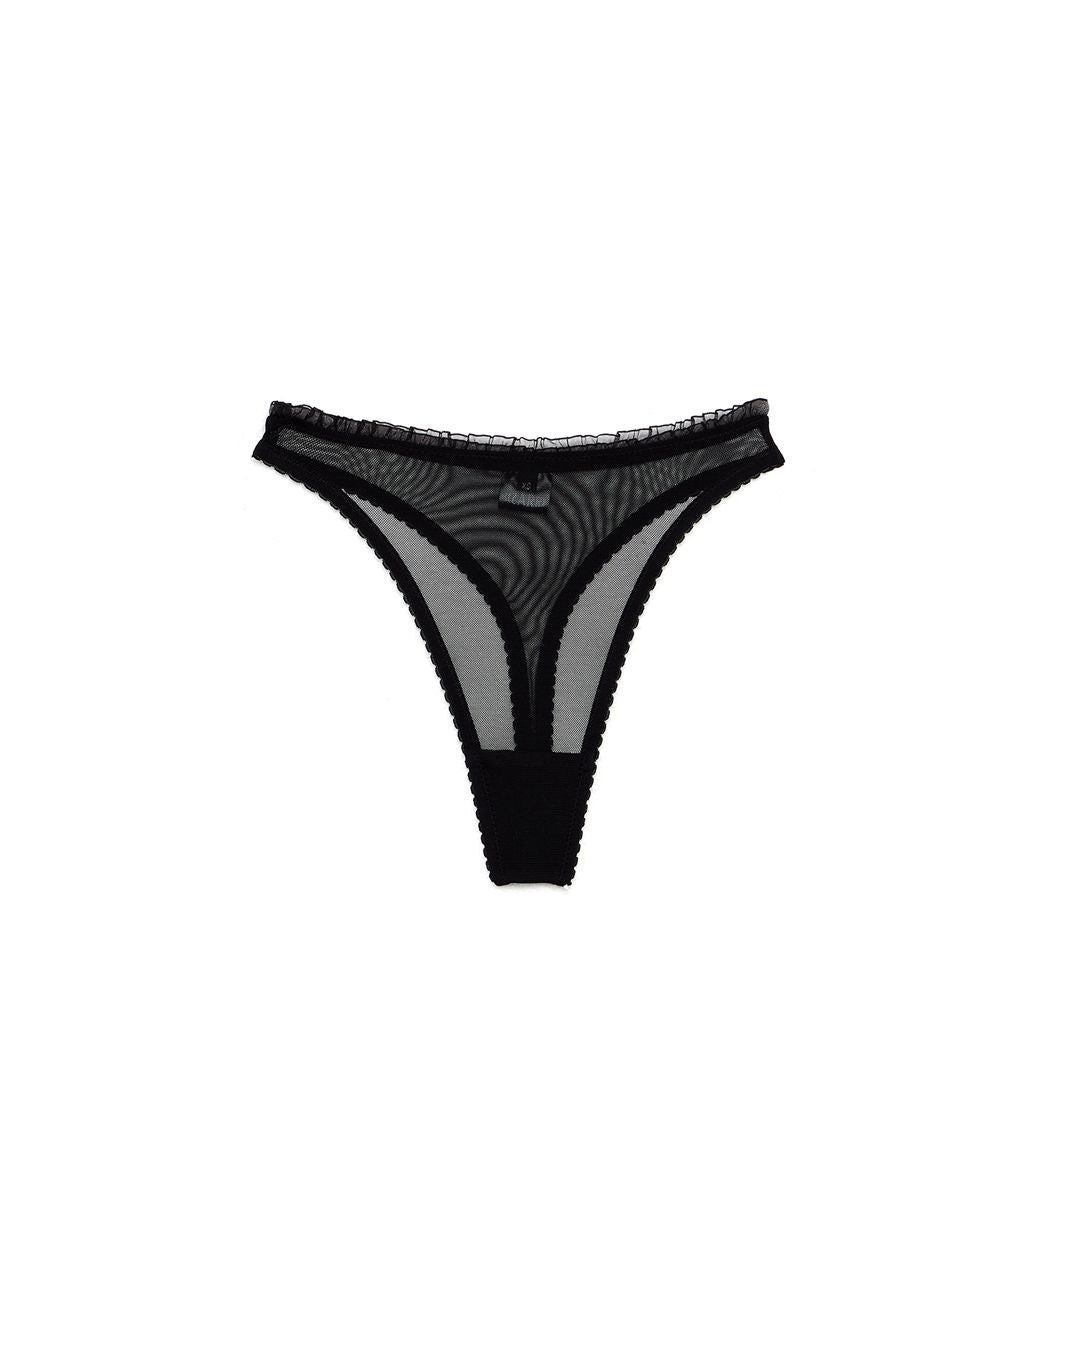 Black mesh thong made by Australian emerging designer called Bizarre. Sold in Melbourne clothing boutique, Error404store.